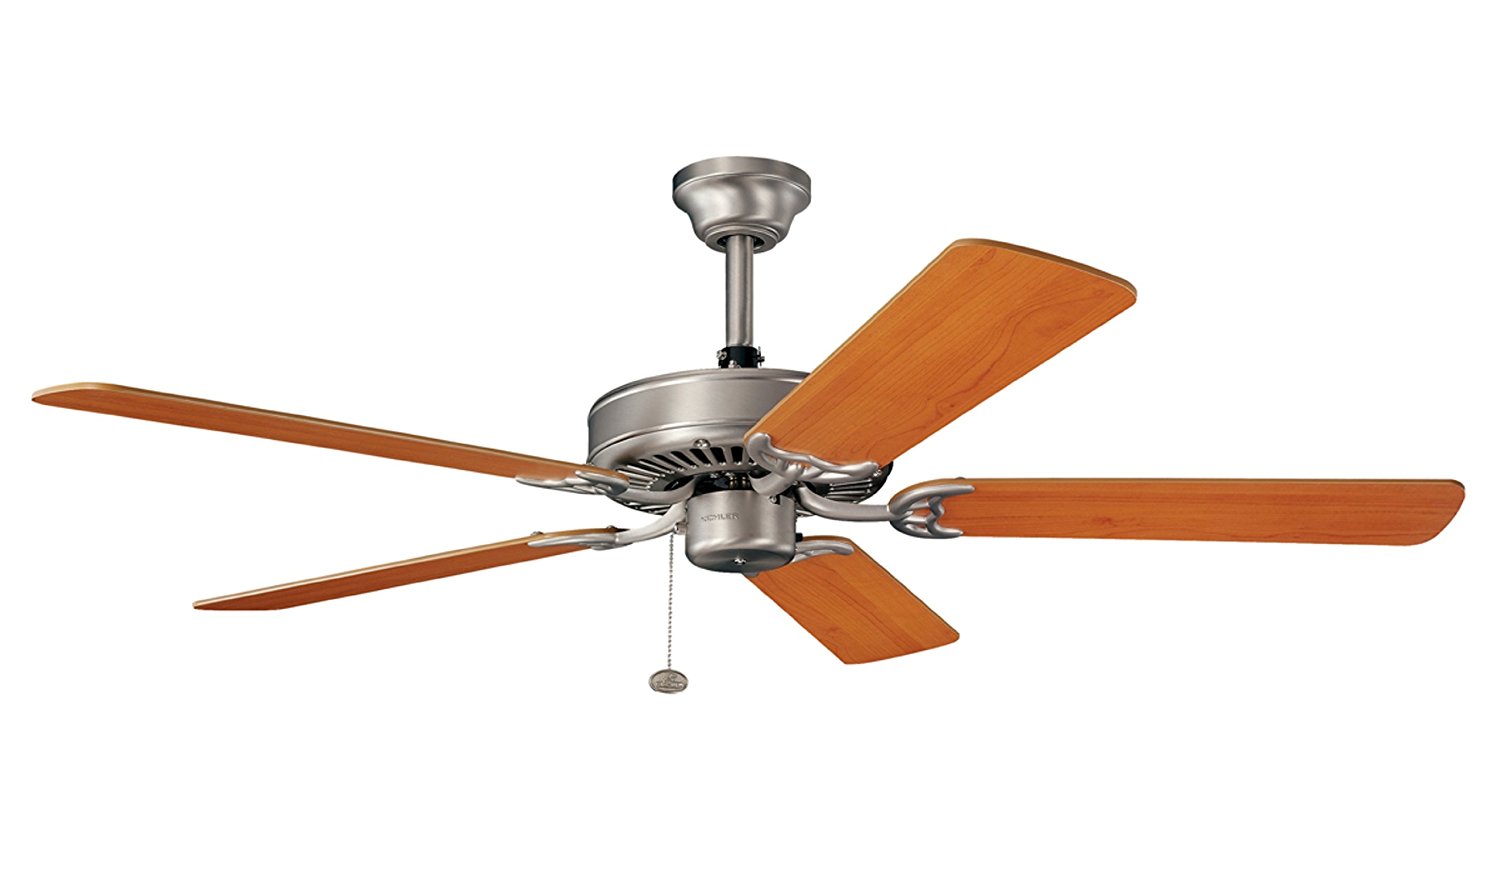 Kichler Lighting 339010NI Sterling Manor 52IN Energy Star Ceiling Fan, Brushed Nickel Finish with Reversible Marive Cherry/Maple Blades